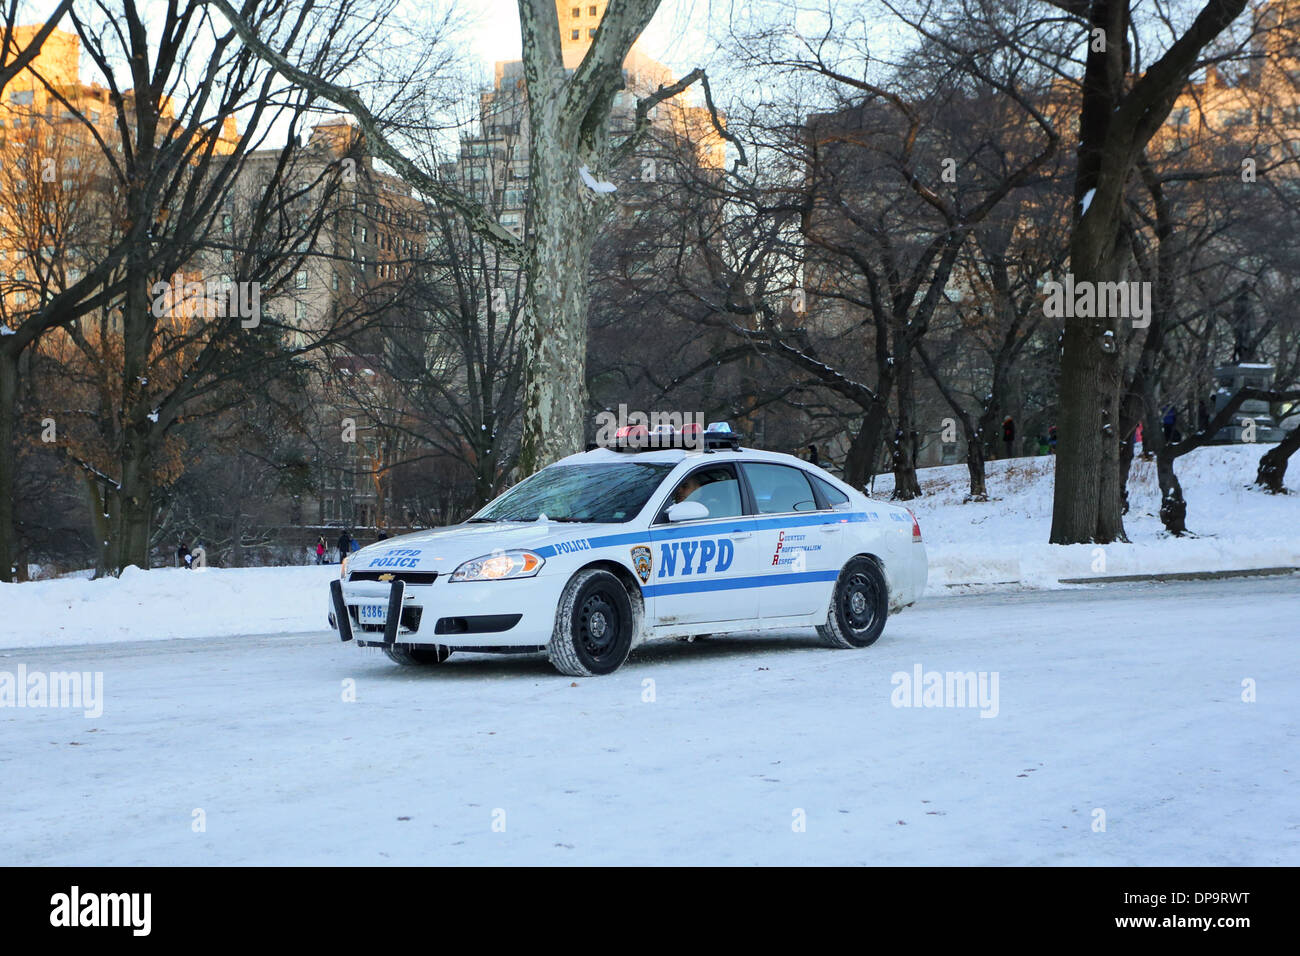 A NYC police car on a snow covered roadway Stock Photo